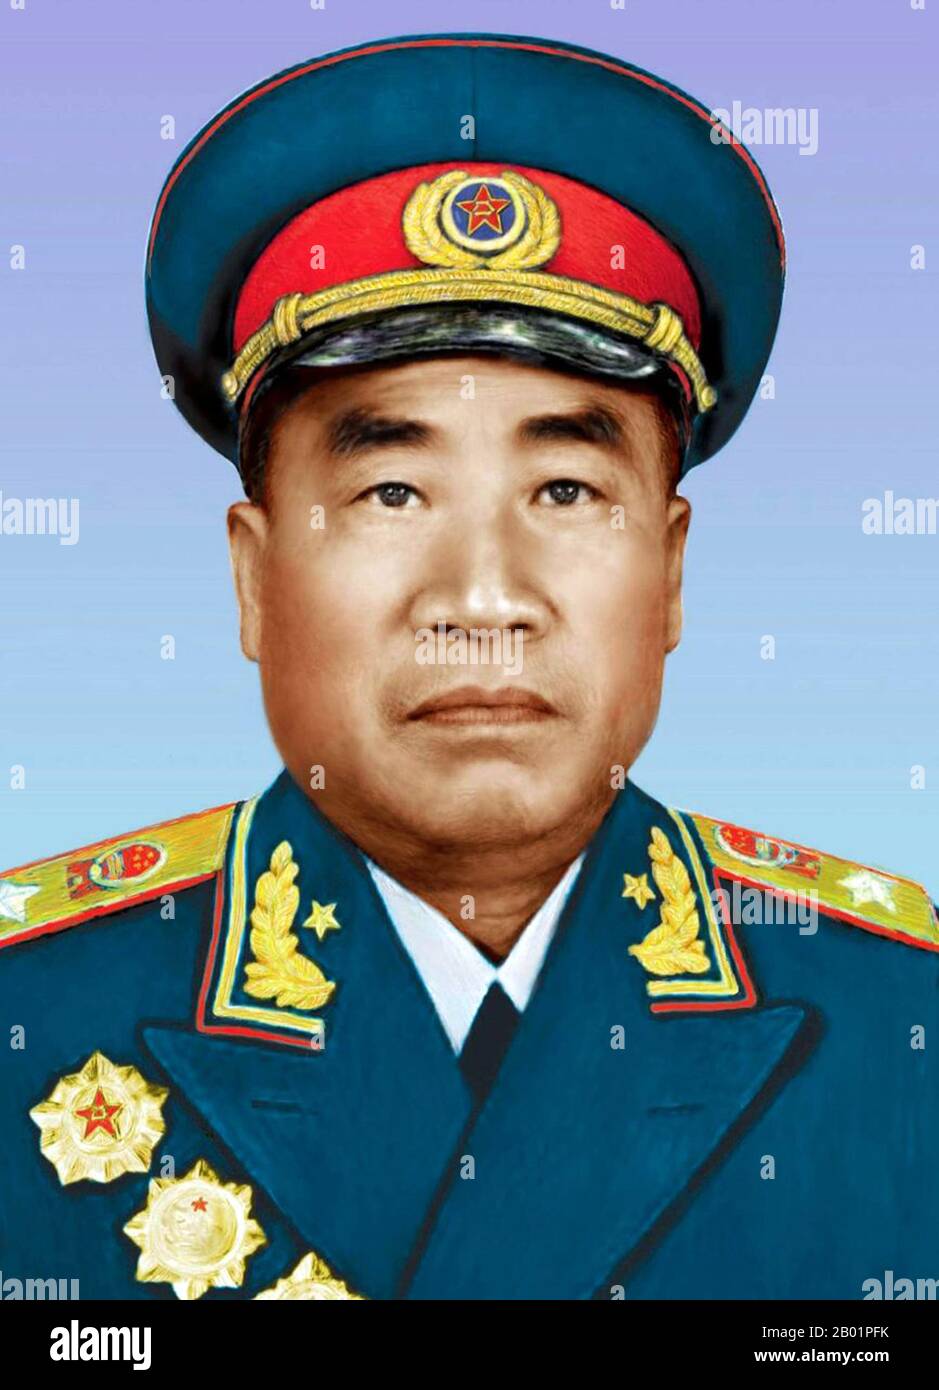 China: Zhu De (1 December 1886 - 6 July 1976) was a Chinese Communist general and military genius, c. 1955.  Zhu De was a Chinese Communist military leader and statesman. He is regarded as the founder of the Chinese Red Army (the forerunner of the People's Liberation Army) and the tactician who engineered the victory of the People's Republic of China during the Chinese Civil War. Stock Photo